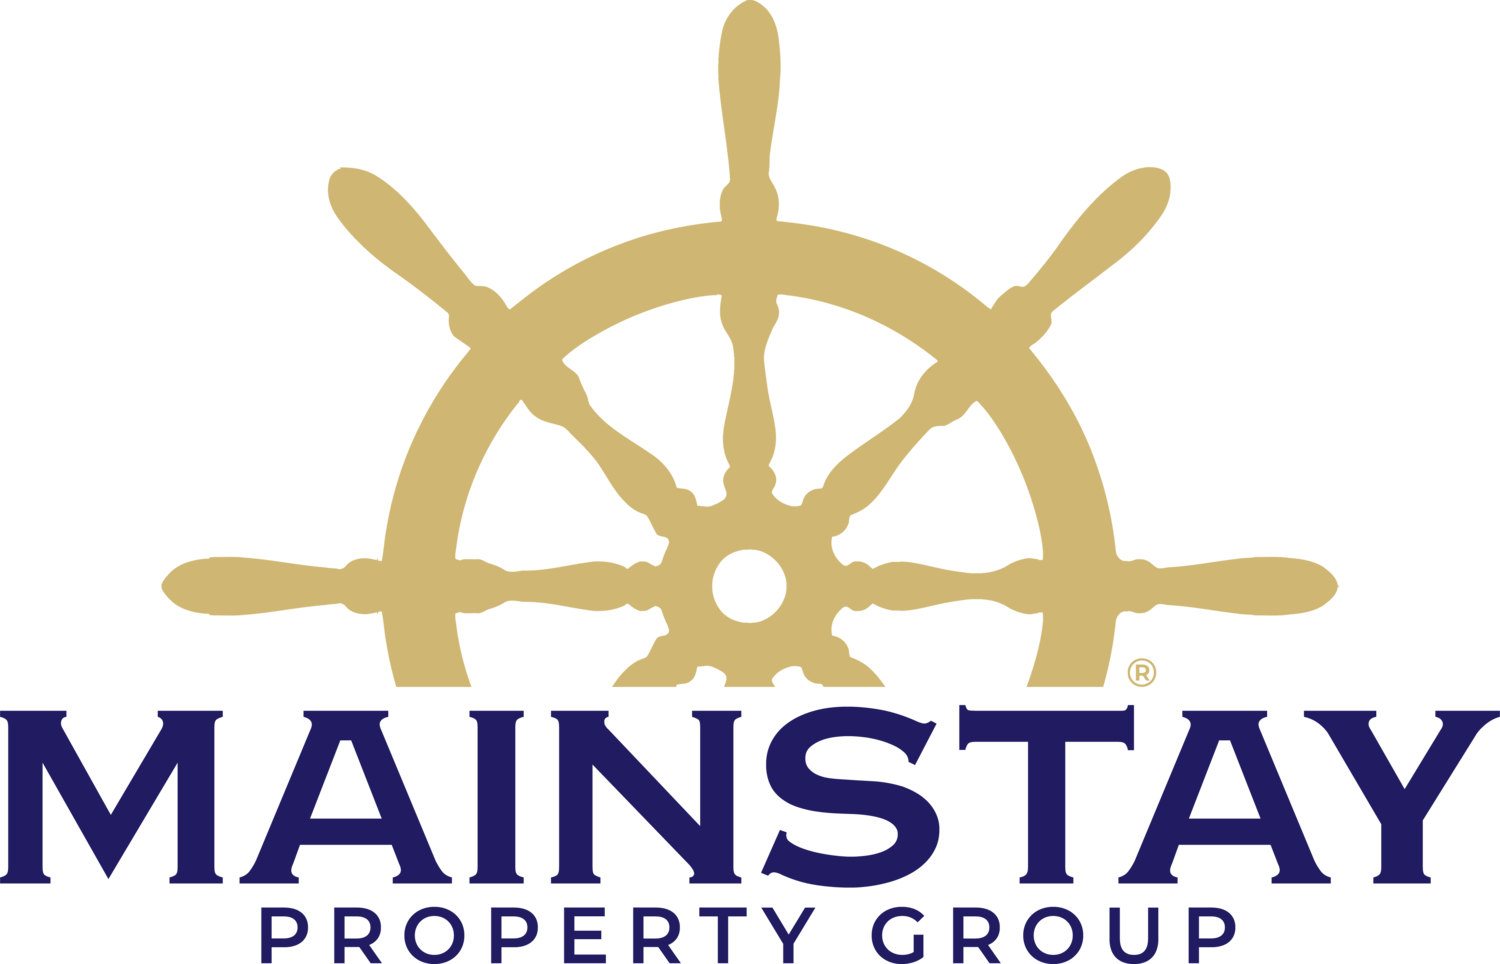 Mainstay Property Group